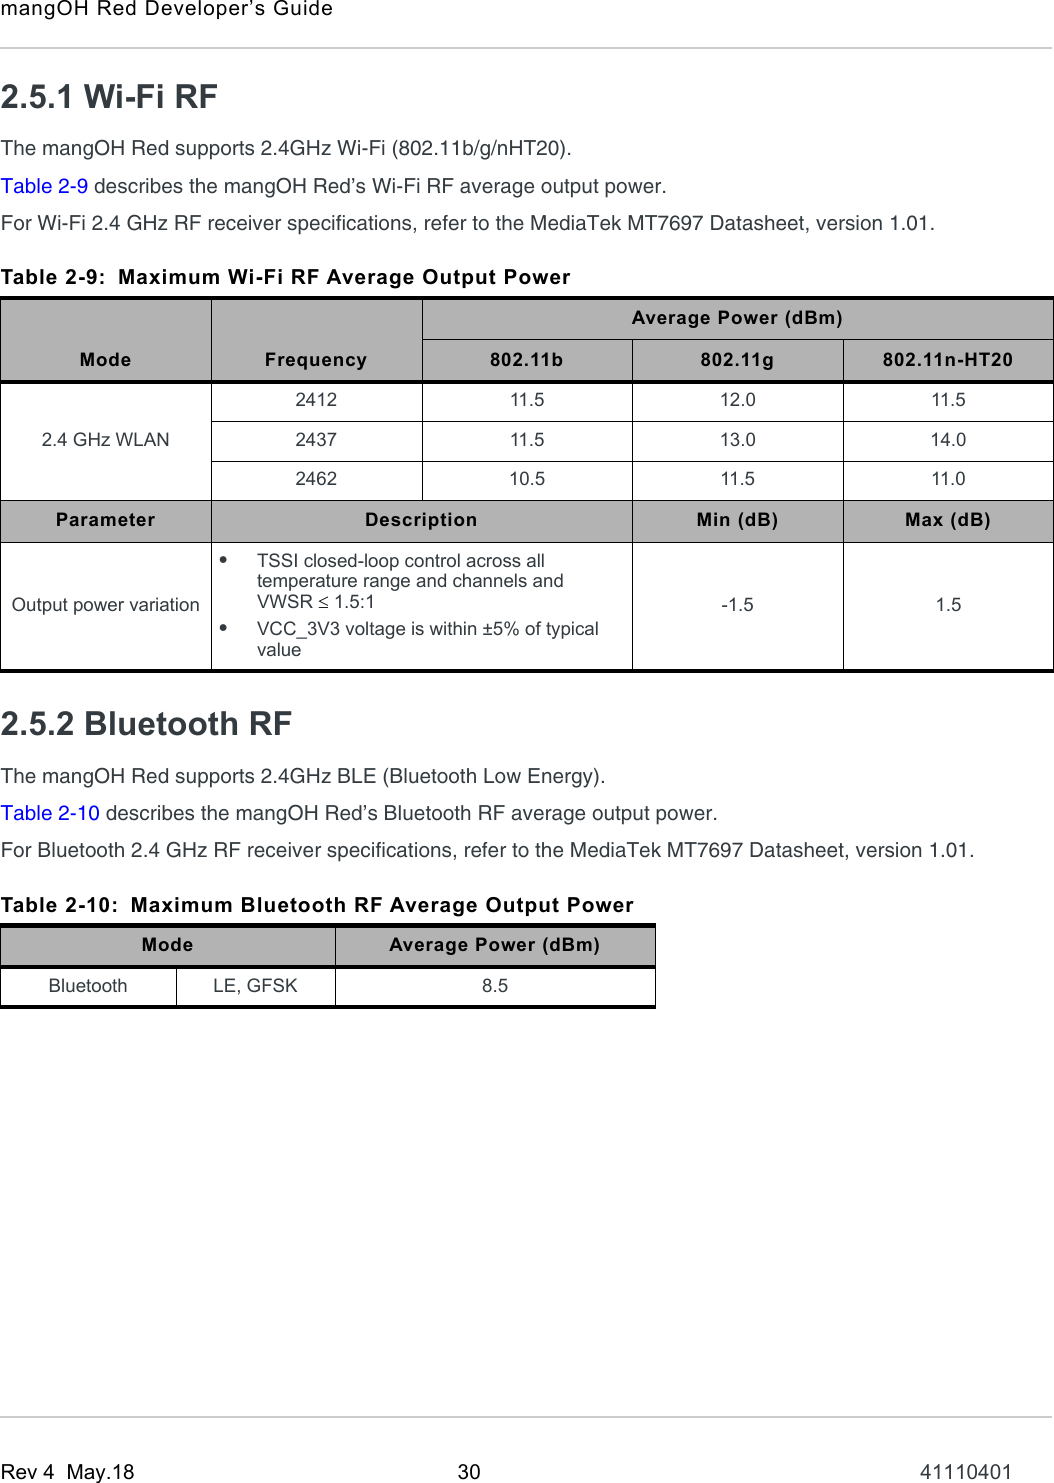 mangOH Red Developer’s GuideRev 4  May.18 30 411104012.5.1 Wi-Fi RFThe mangOH Red supports 2.4GHz Wi-Fi (802.11b/g/nHT20).Table 2-9 describes the mangOH Red’s Wi-Fi RF average output power.For Wi-Fi 2.4 GHz RF receiver specifications, refer to the MediaTek MT7697 Datasheet, version 1.01.2.5.2 Bluetooth RFThe mangOH Red supports 2.4GHz BLE (Bluetooth Low Energy).Table 2-10 describes the mangOH Red’s Bluetooth RF average output power.For Bluetooth 2.4 GHz RF receiver specifications, refer to the MediaTek MT7697 Datasheet, version 1.01.Table 2-9: Maximum Wi-Fi RF Average Output PowerMode FrequencyAverage Power (dBm)802.11b 802.11g 802.11n-HT202.4 GHz WLAN2412 11.5 12.0 11.52437 11.5 13.0 14.02462 10.5 11.5 11.0Parameter Description Min (dB) Max (dB)Output power variation•TSSI closed-loop control across all temperature range and channels and VWSR  1.5:1•VCC_3V3 voltage is within ±5% of typical value-1.5 1.5Table 2-10: Maximum Bluetooth RF Average Output PowerMode Average Power (dBm)Bluetooth LE, GFSK 8.5